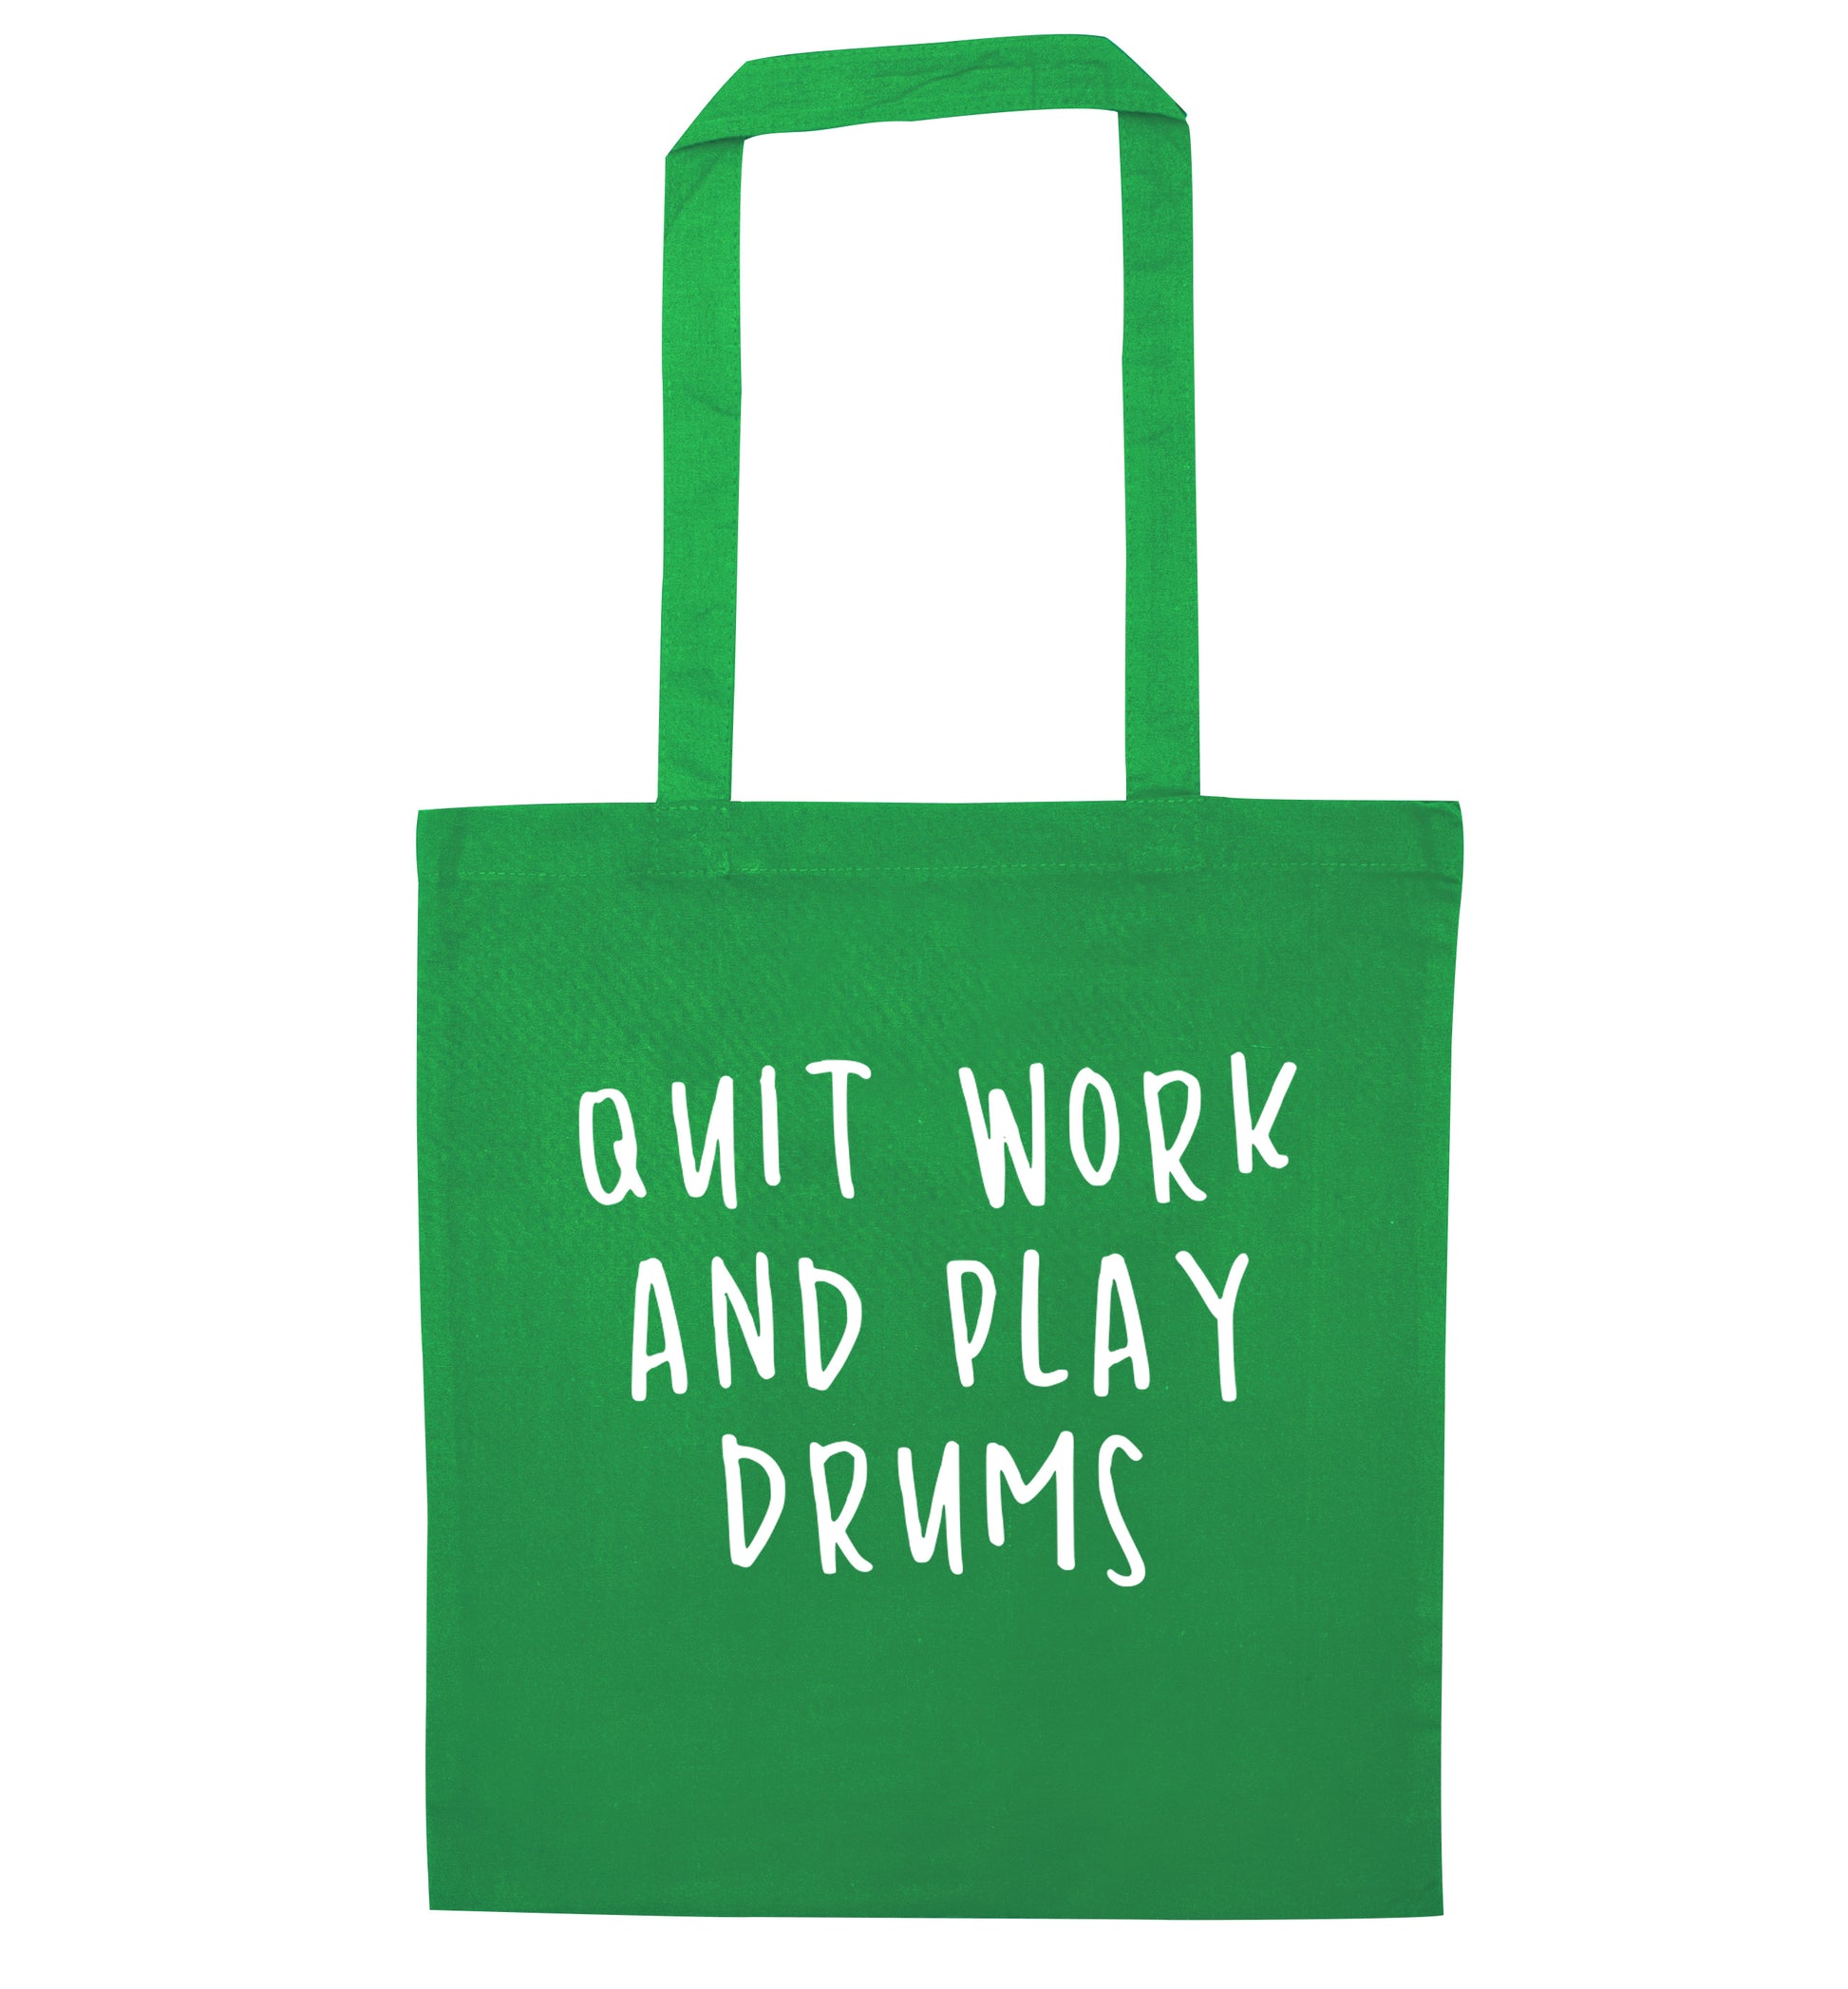 Quit work and play drums green tote bag